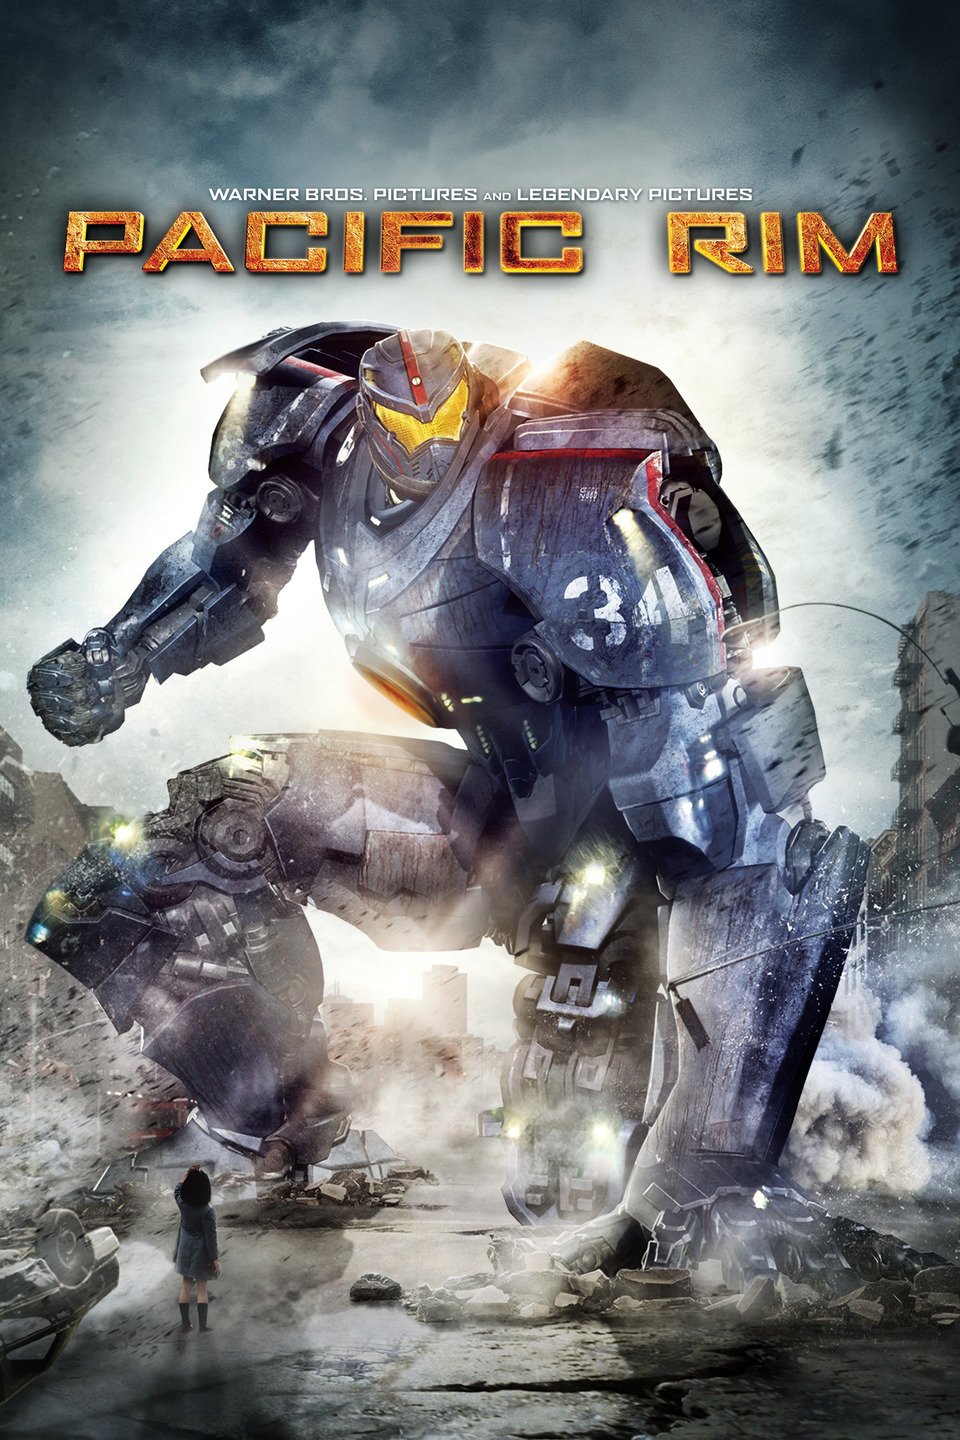 how long is the pacific rim movie